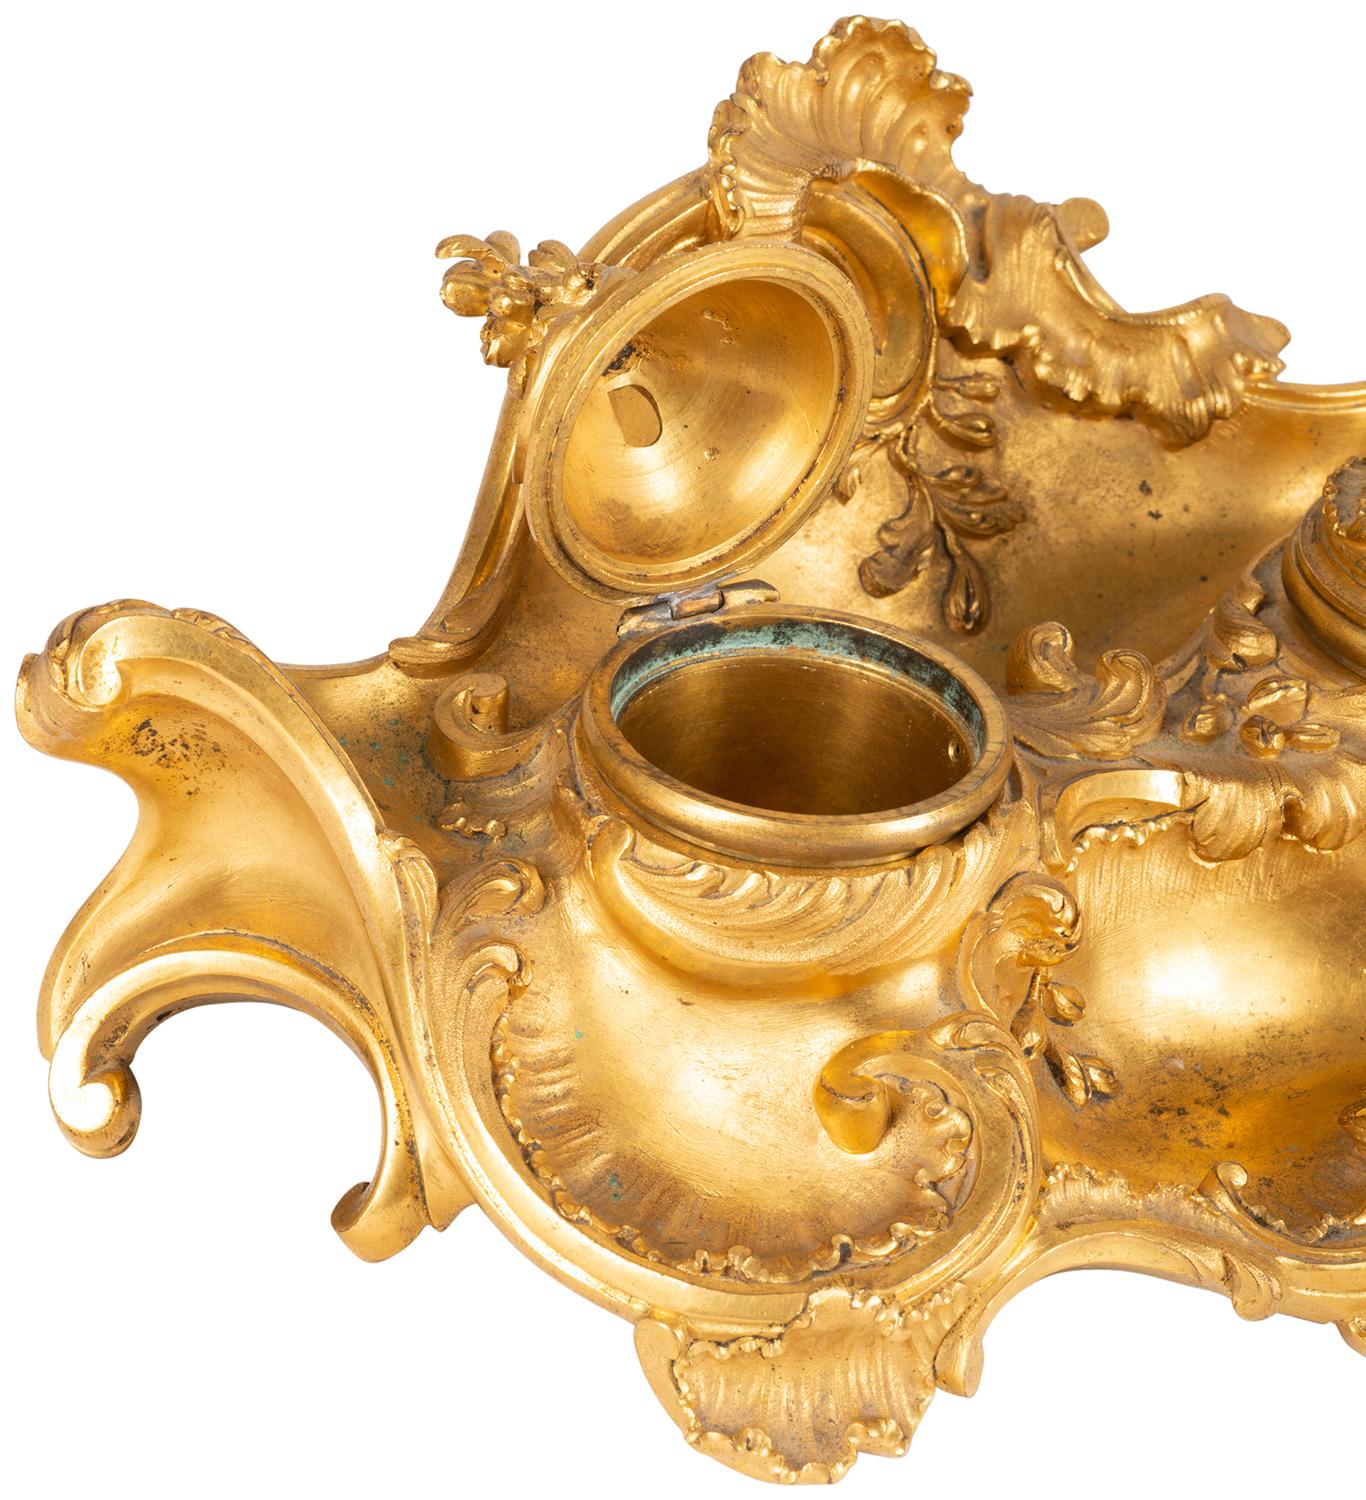 A fine quality late 19th century gilded ormolu inkwell Rococo influenced inkwell, having scrolling foliate decoration to the whole, two lidded inkwells, signed; Millet, Paris

Maison Millet (FrencH, FL. 1853-1918) Return To Glossary
Maison Millet